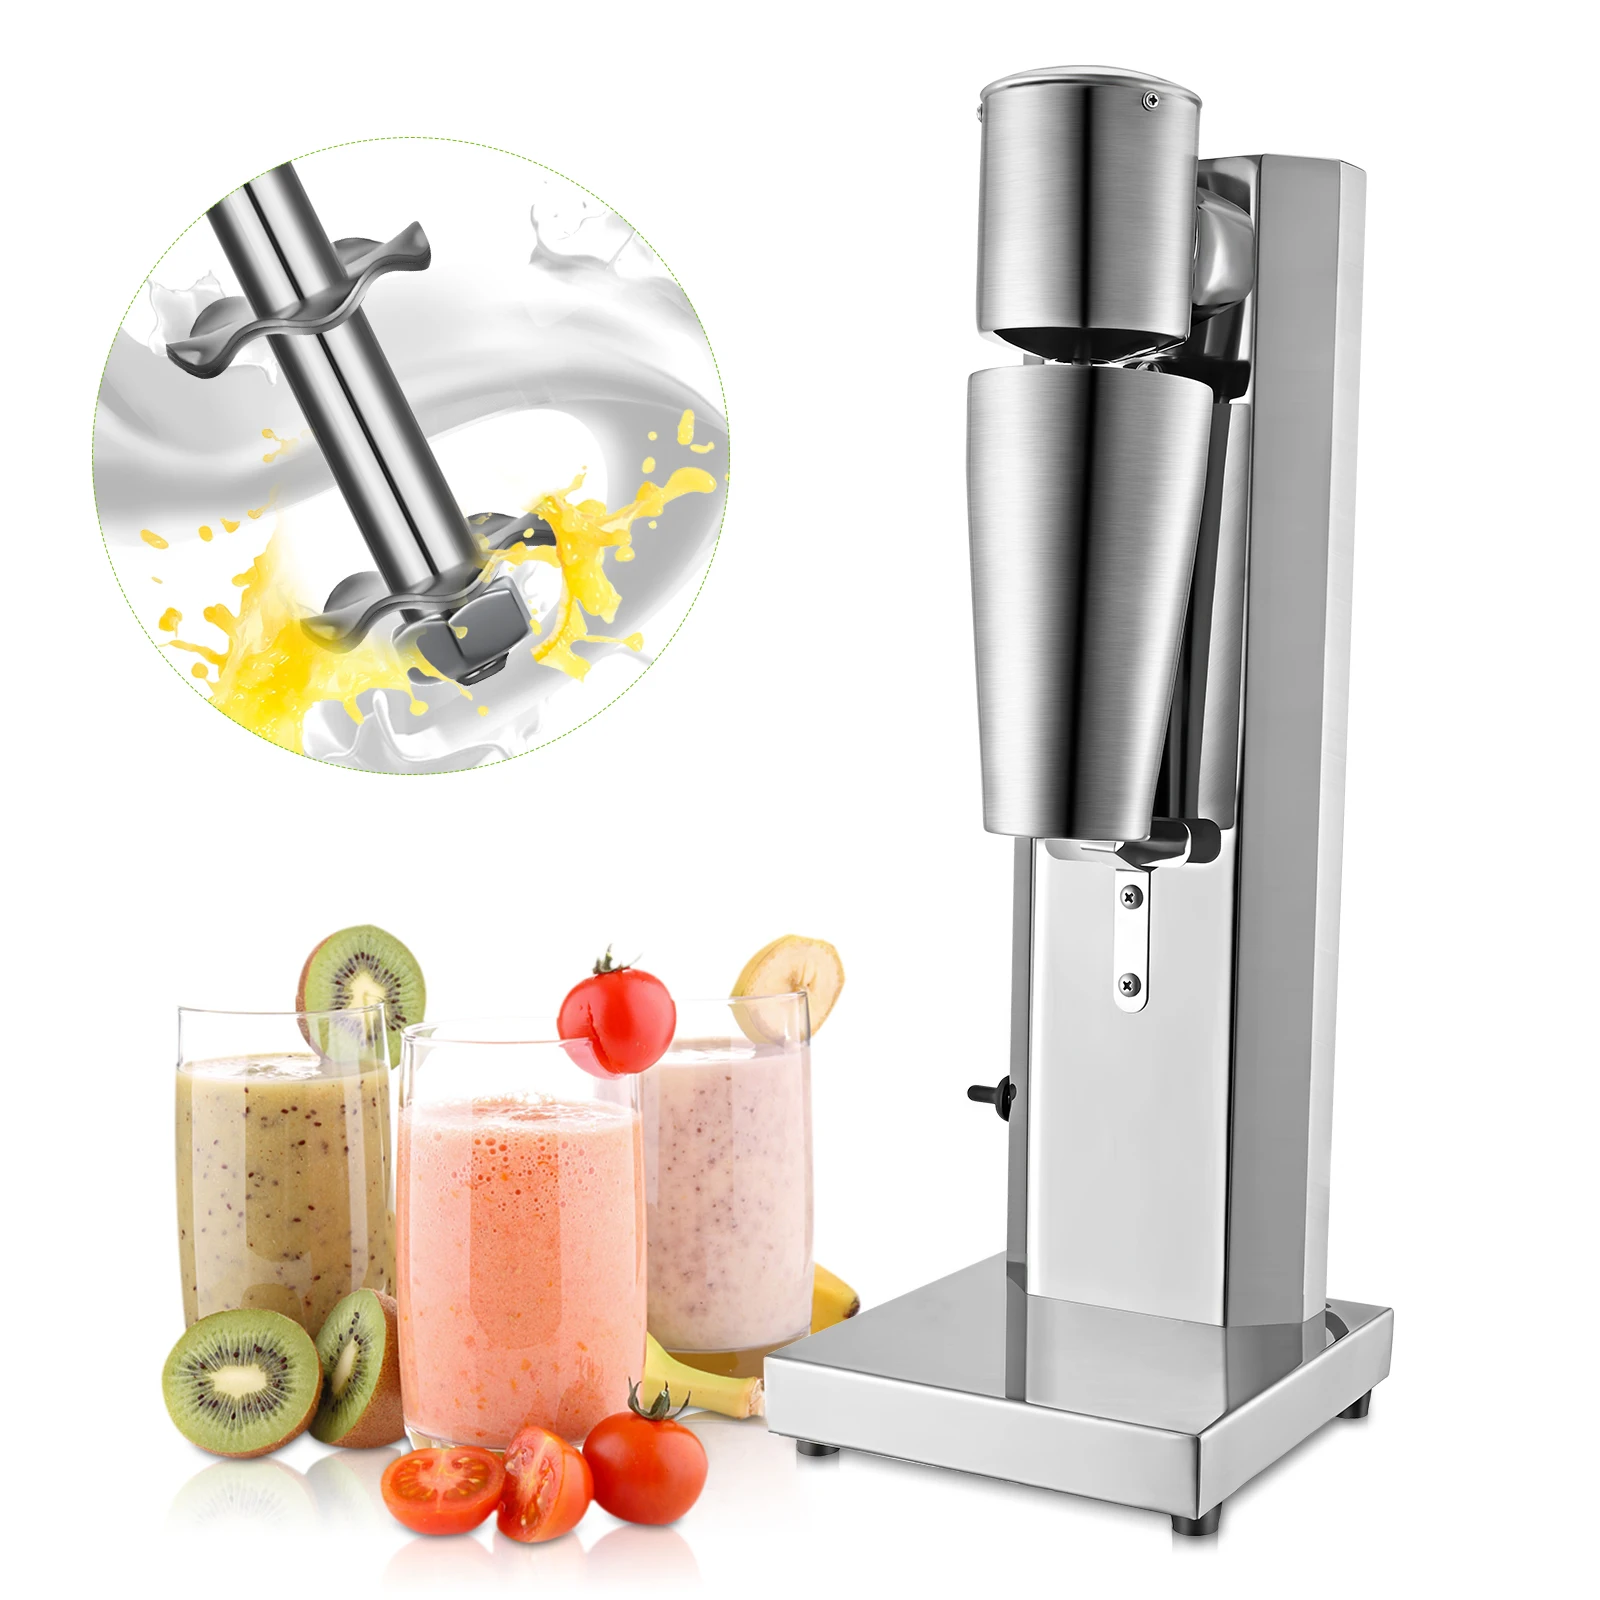 

Electric Milk Shake Machine Stainless Steel Milkshaker Frother Foam Shaker Smoothie Ice Cream Blender Mixer With Two 800ML Cups